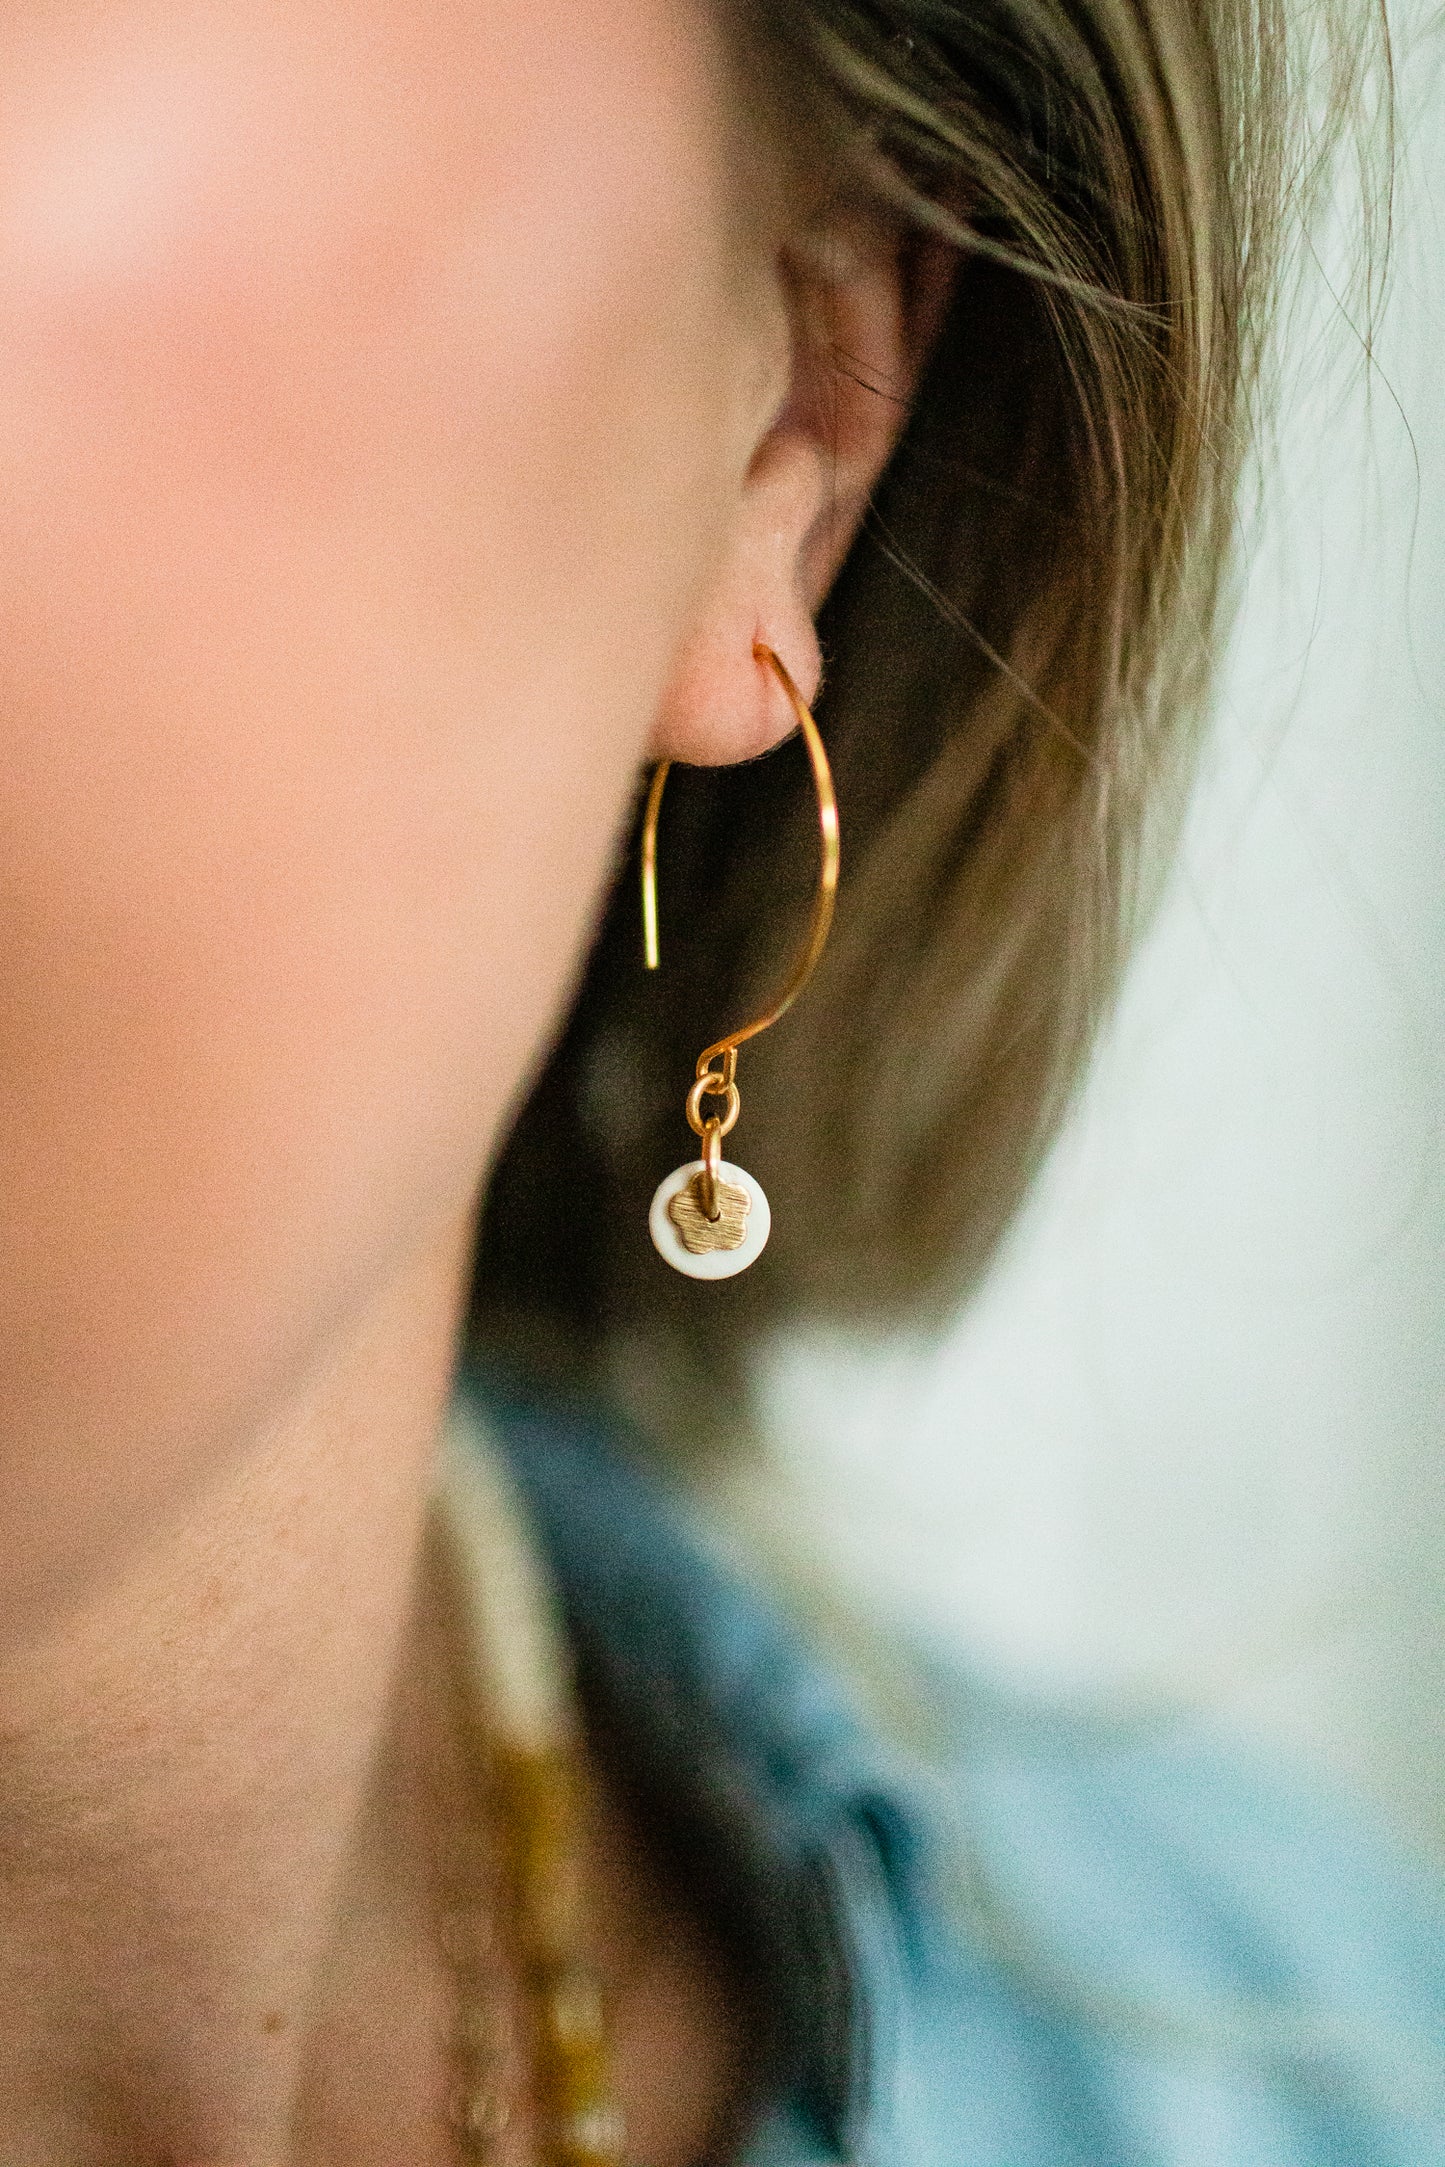 May Earrings in cream and gold